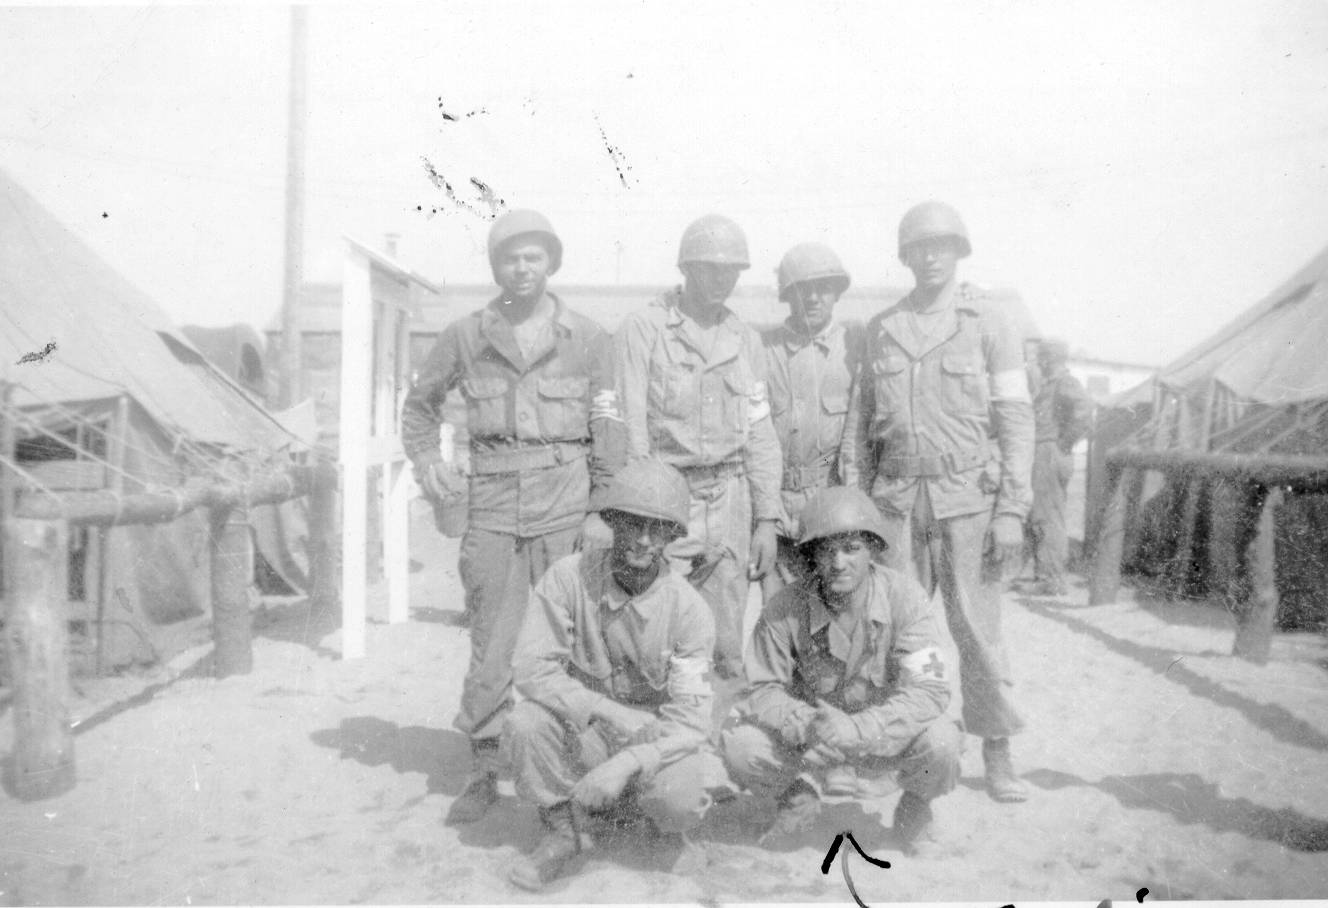 Frankie with his fellow medics in 1944.